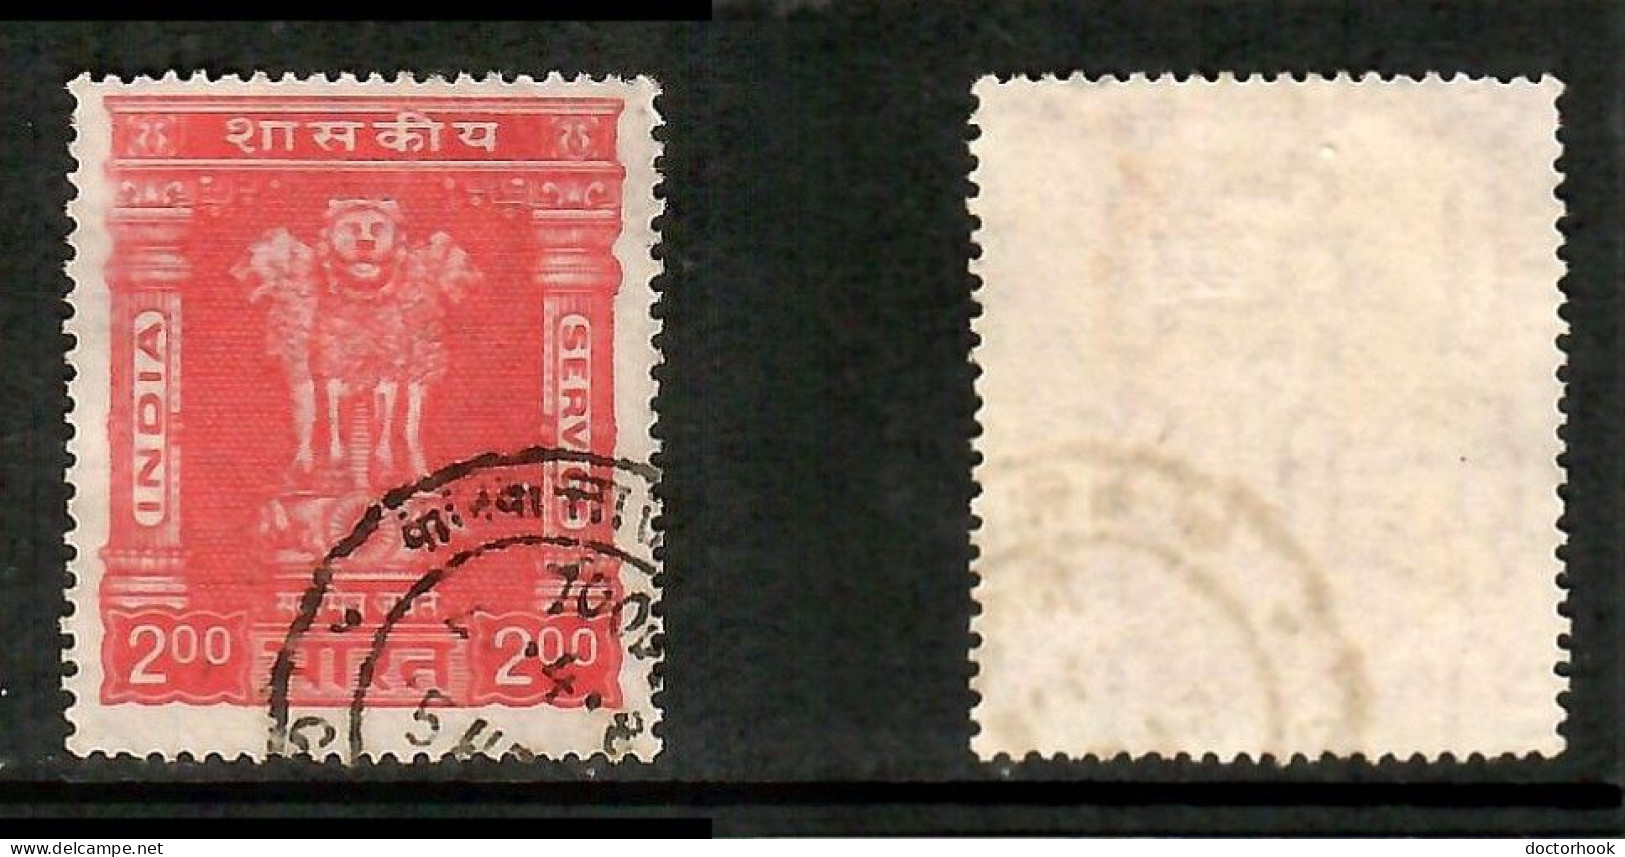 INDIA Scott # O 183 USED (CONDITION PER SCAN) (Stamp Scan # 1034-14) - Timbres De Service